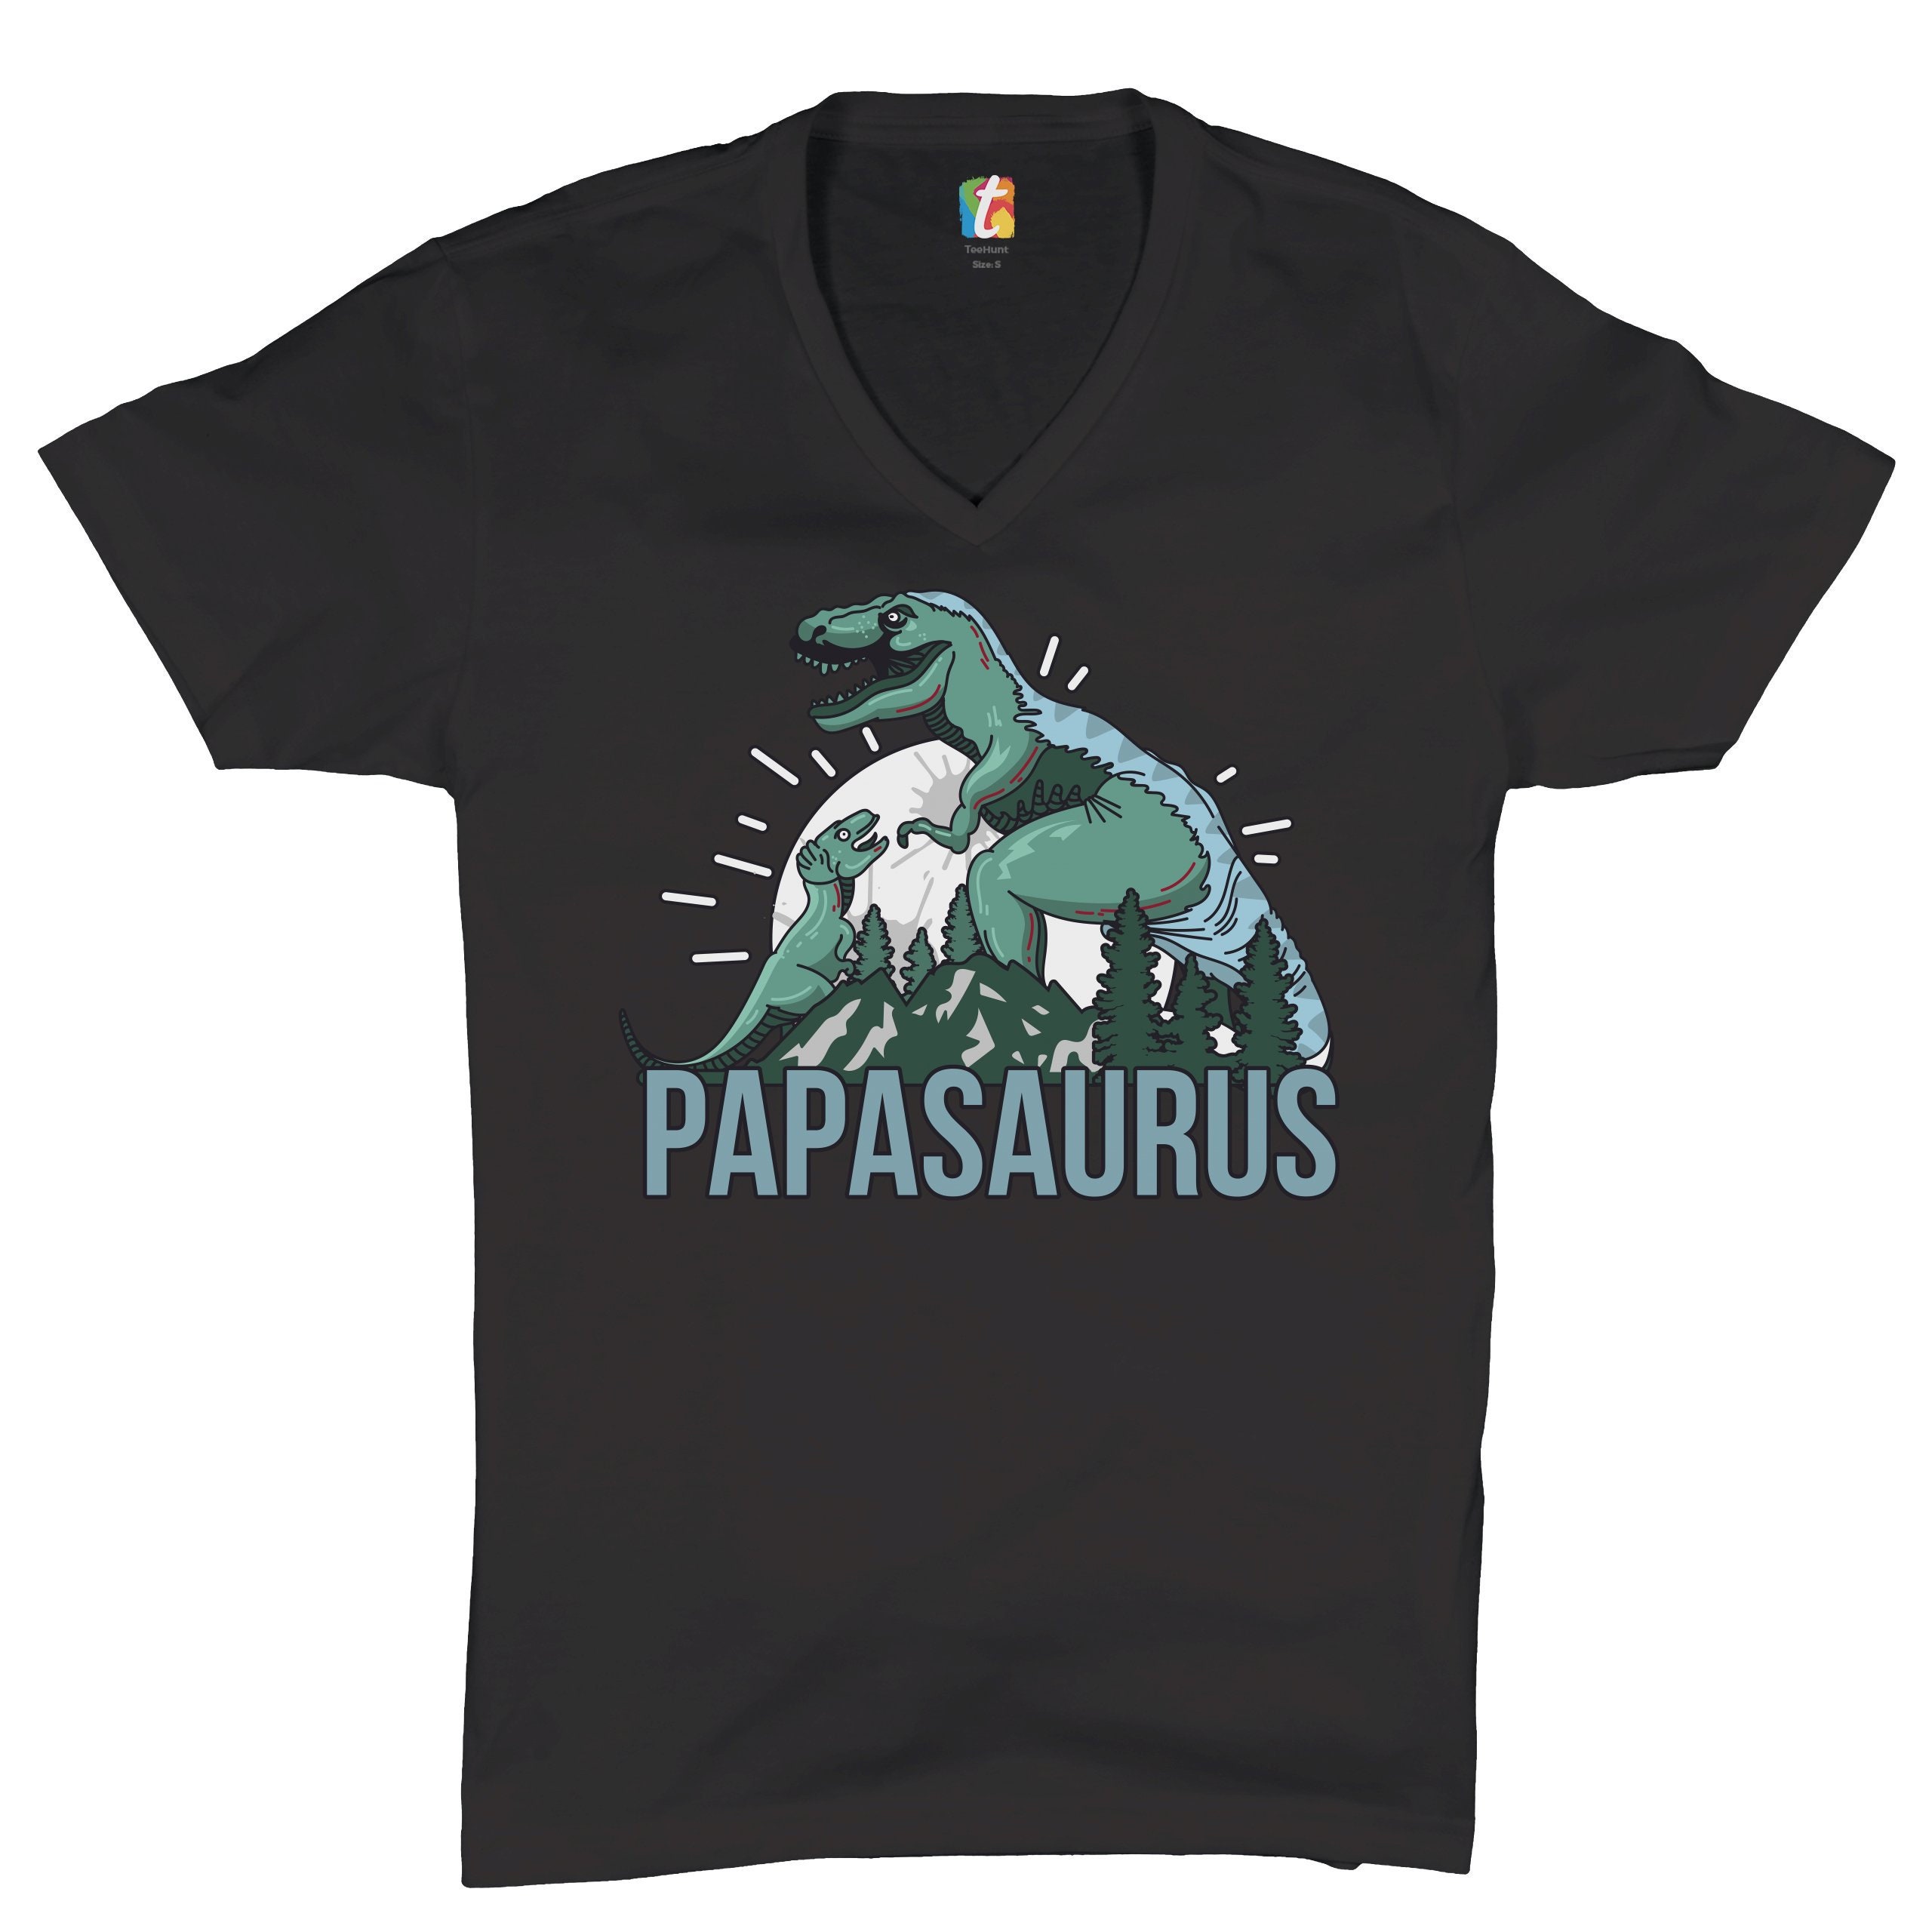 My Grandpa Is As Old As A Dinosaur Grandpa Toddler Shirt Funny Toddler Tees Short Sleeve White Size 2T Back to School Clothes 